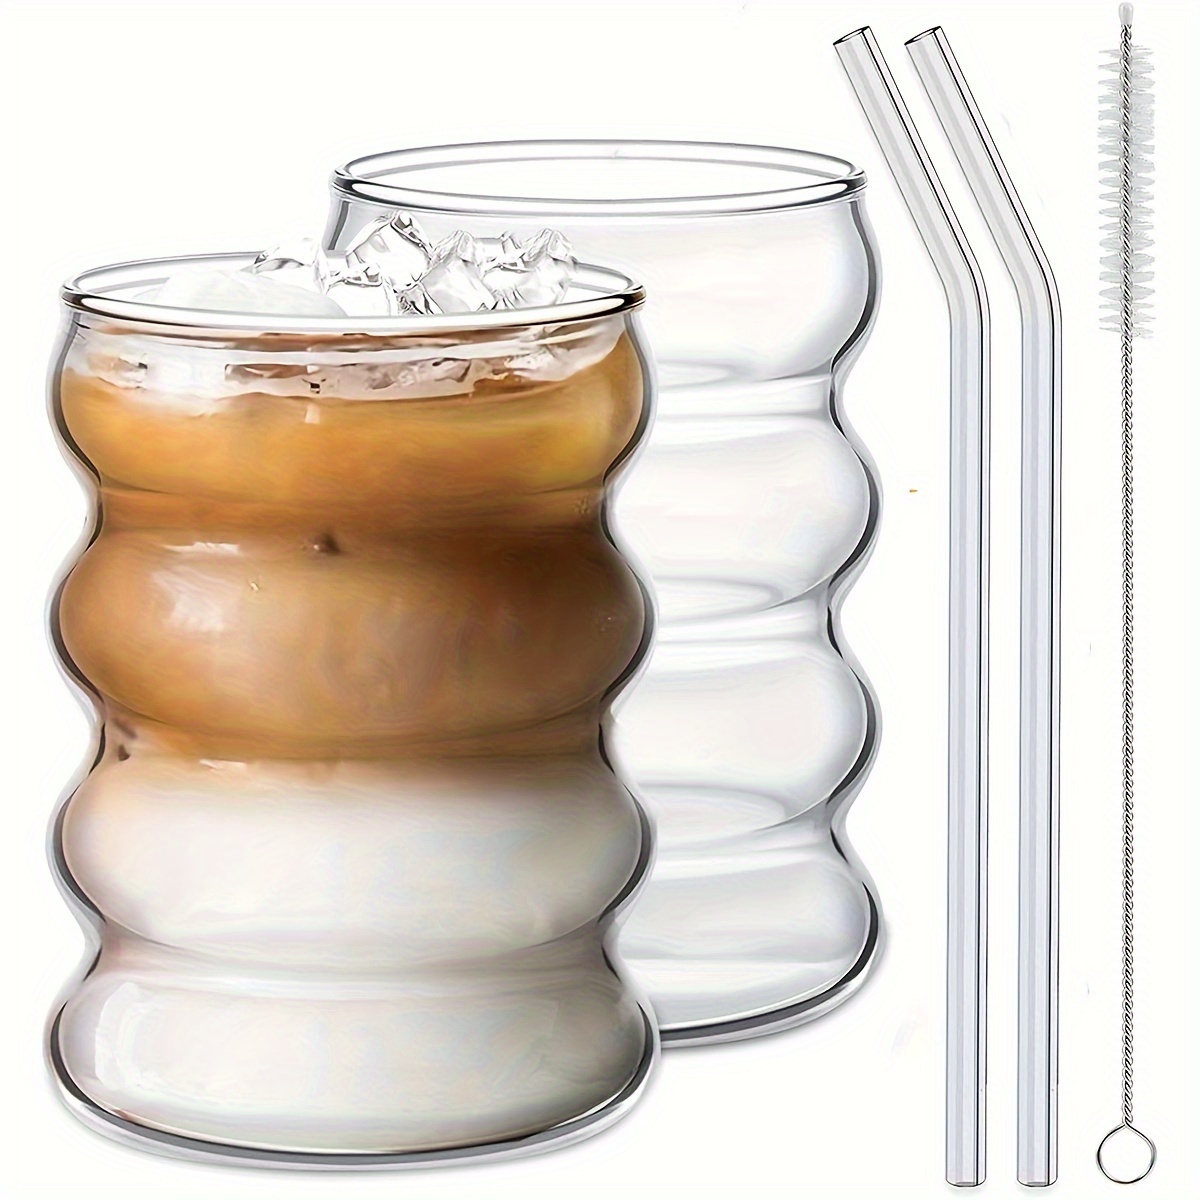 

2pcs, Caterpillar Glass Cups With Straws And Straw Brush, Water Cup, Iced Coffee Cups, Drinking Glasses For Juice, Milk, Tea, And More, Summer Winter Drinkware